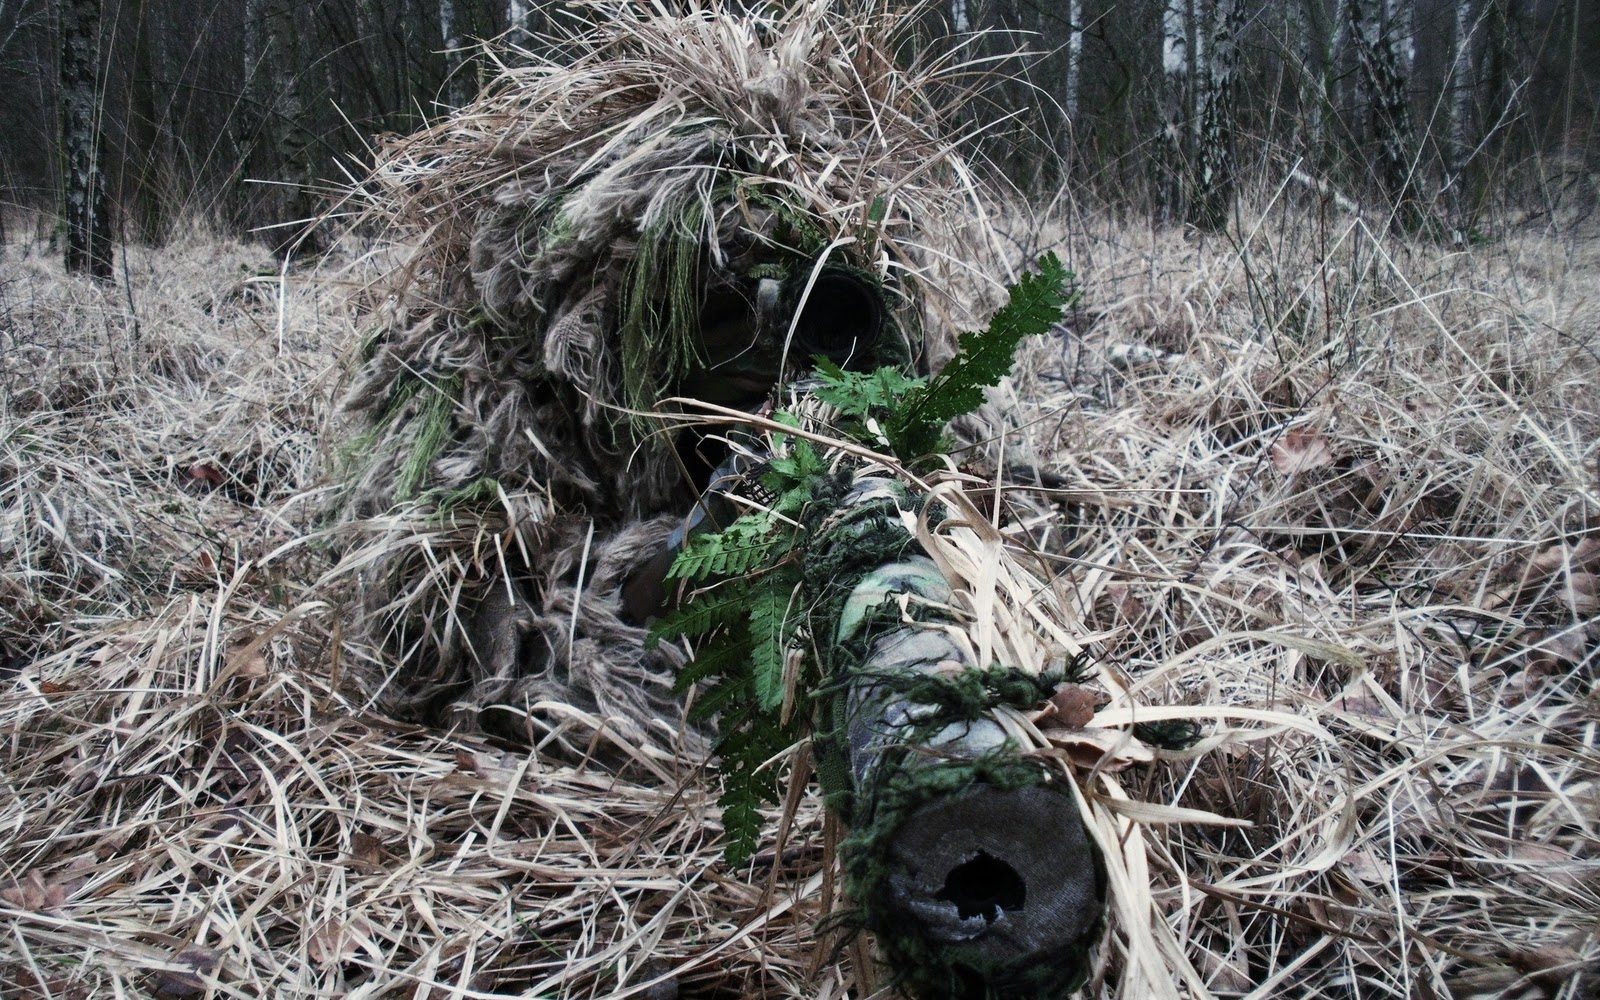 RANHOME Ghillie Suit - 3D Ghillie Suits For Hunting, Superior Camouflage  Equipment For Snipers, Hunters, Paintball And Airsoft, Jacket, Trousers,  Storage Bag, Gun Rope : Amazon.de: Sports & Outdoors